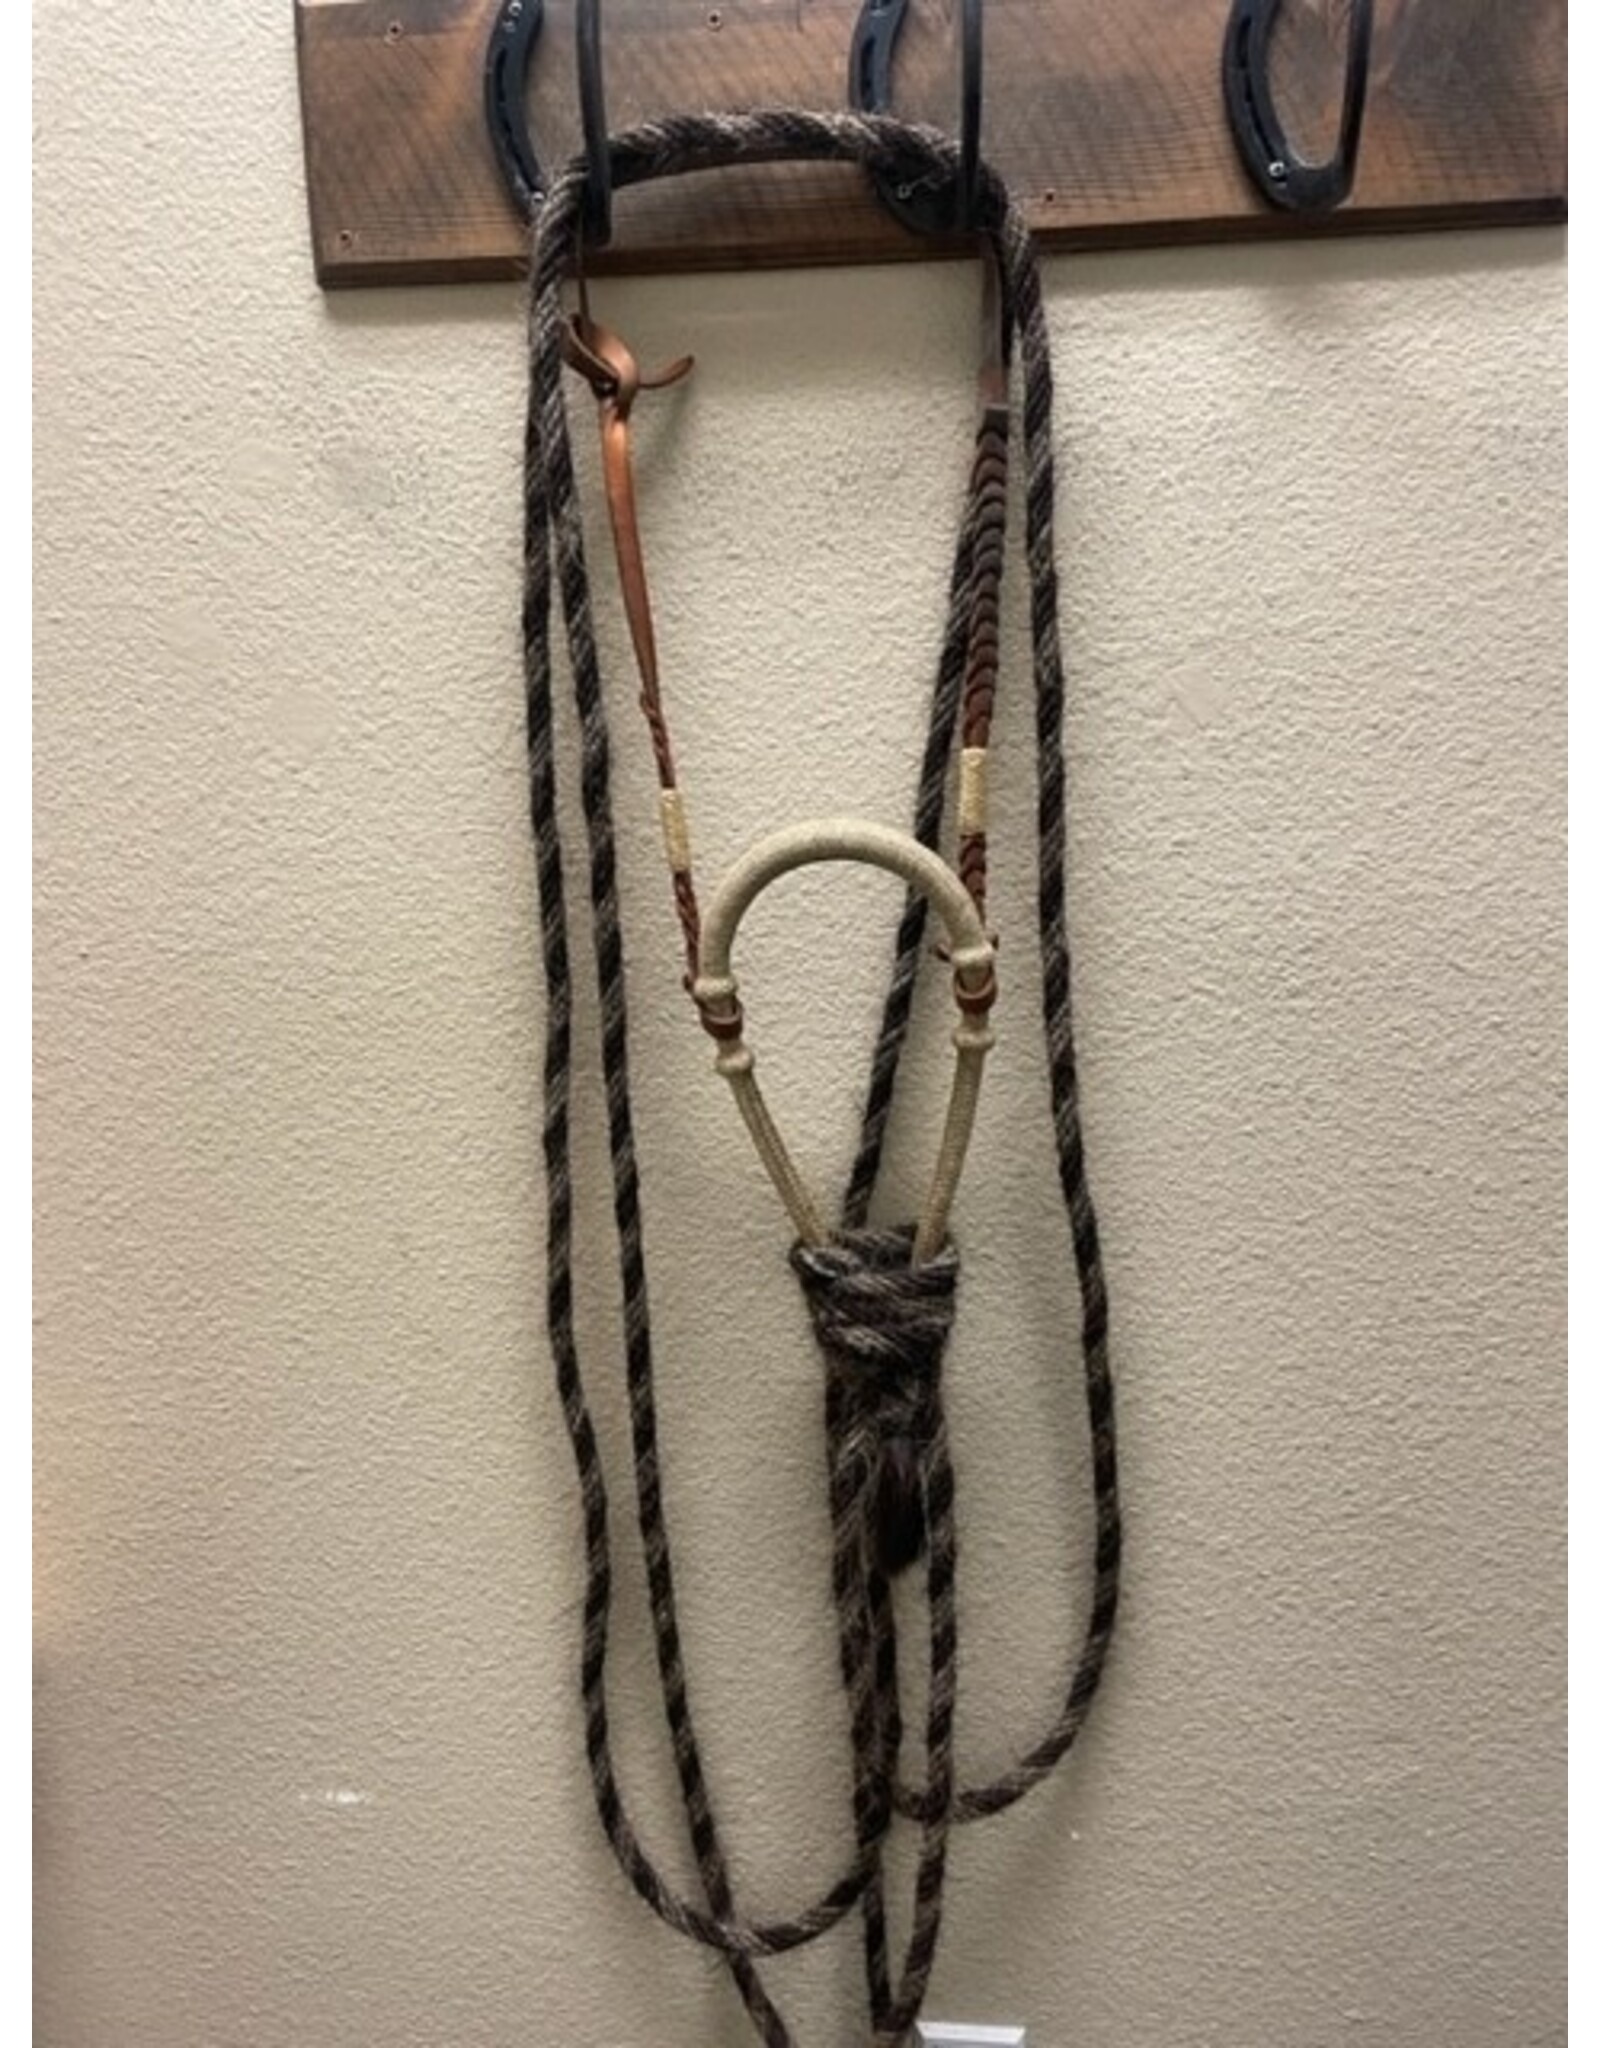 Rawhide Bosal w/leather hanger and horsehair mecate reins